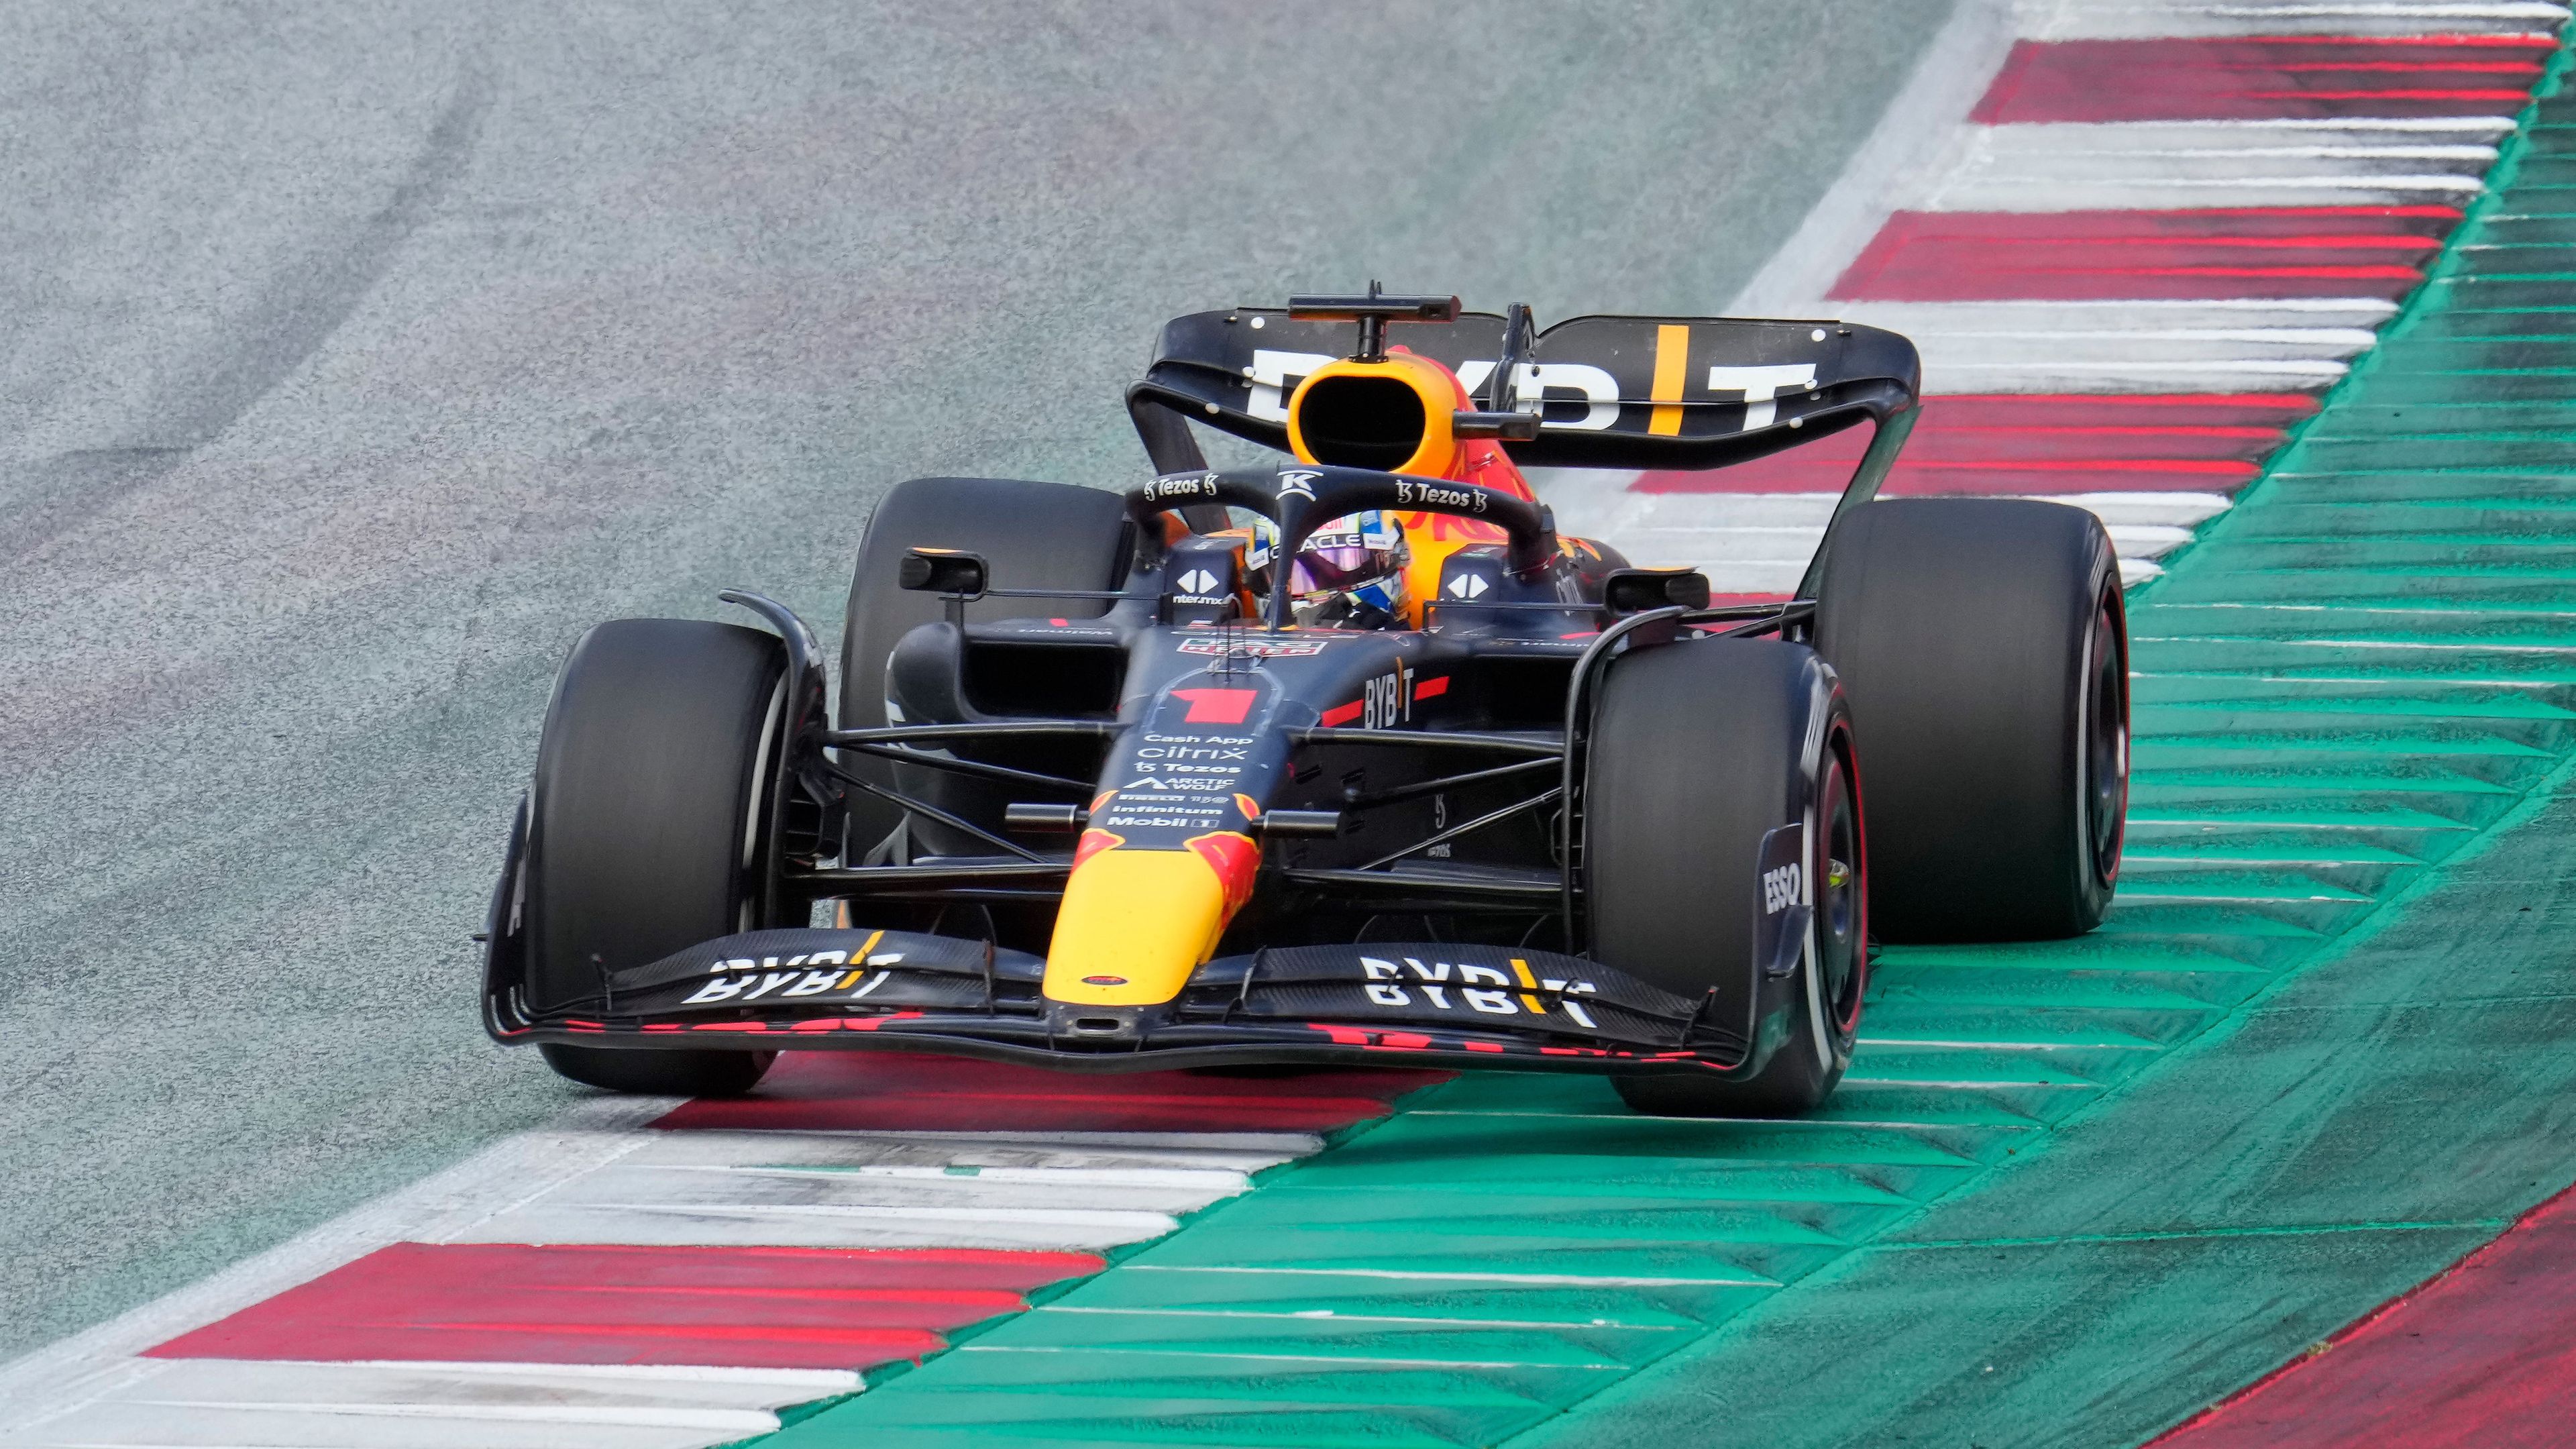 Red Bull boss Christian Horner warns track limits will be an even bigger issue at next race in France